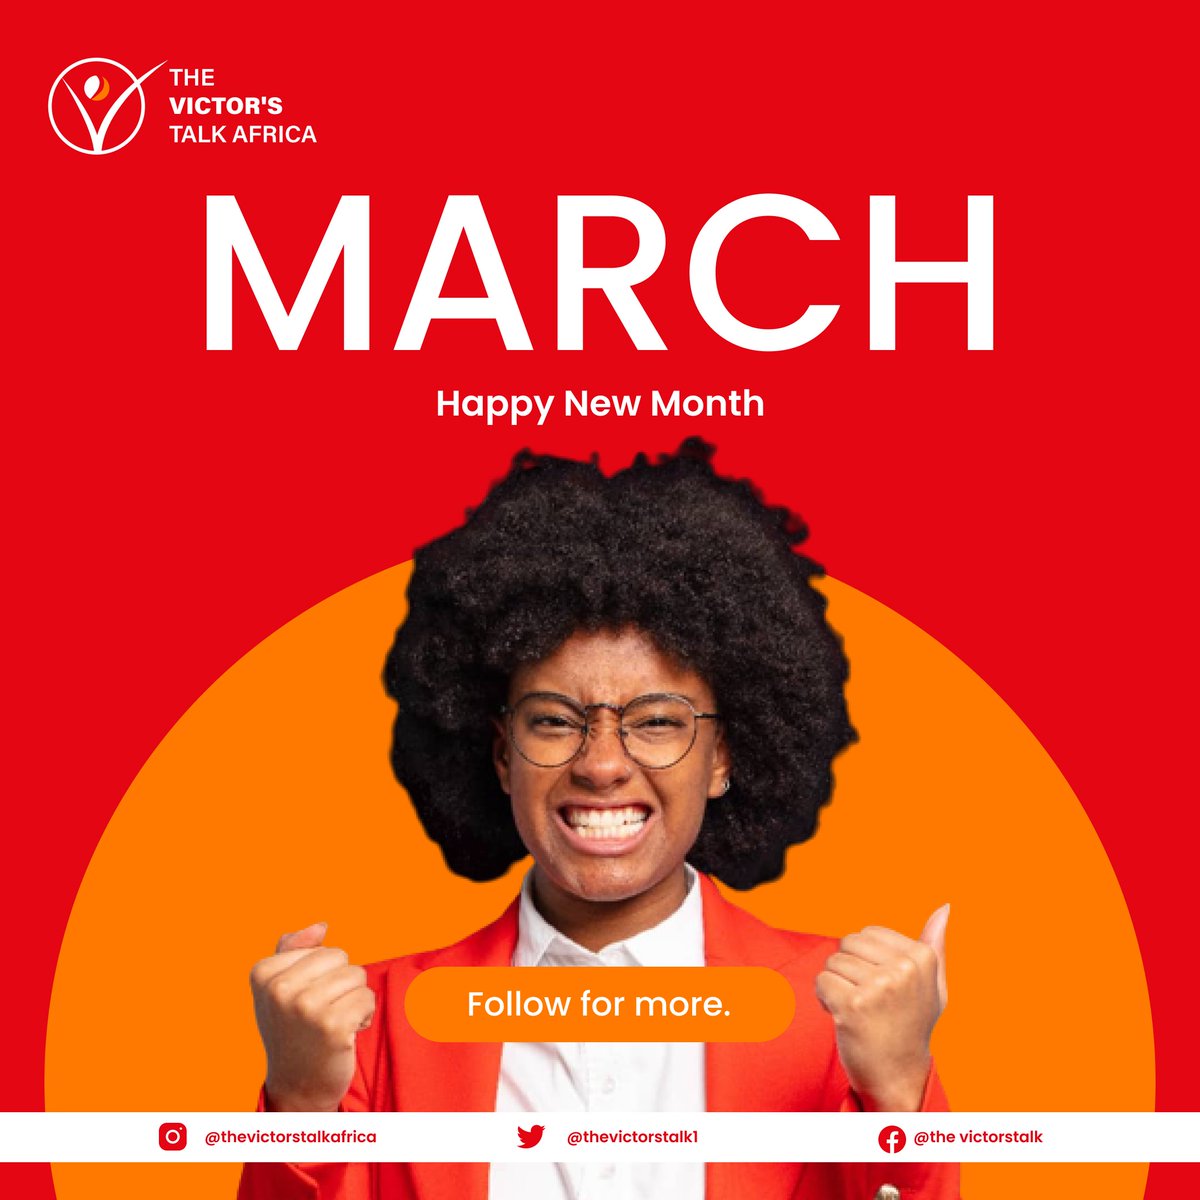 Wishing you all a month filled with good health, hope, prosperity, happiness and love 🫂❤️
#SickleCellAwareness#sicklecellwarrior#sicklecell#SickleCellCommunity